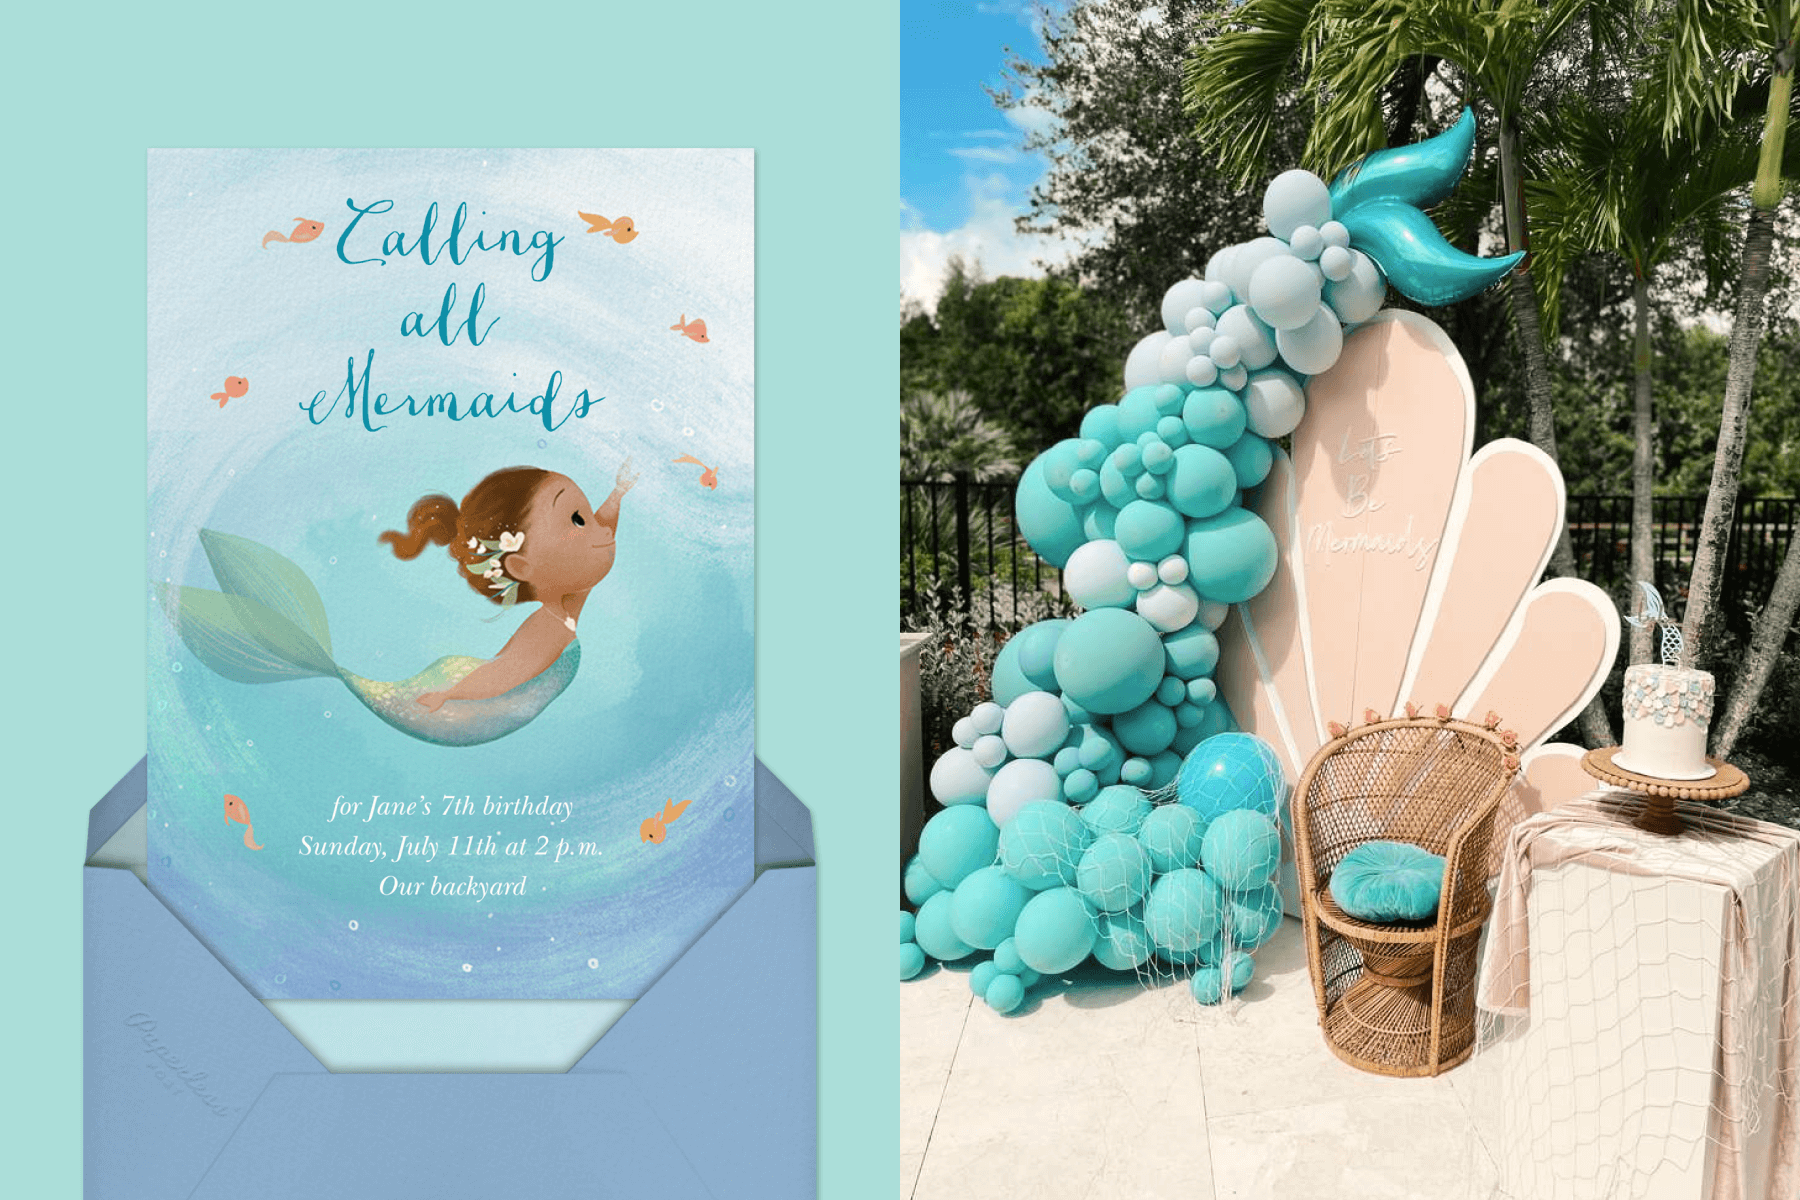 An invitation with a child mermaid surrounded by goldfish. Right: Party decor with a blue balloon installation made to resemble a mermaid tail.